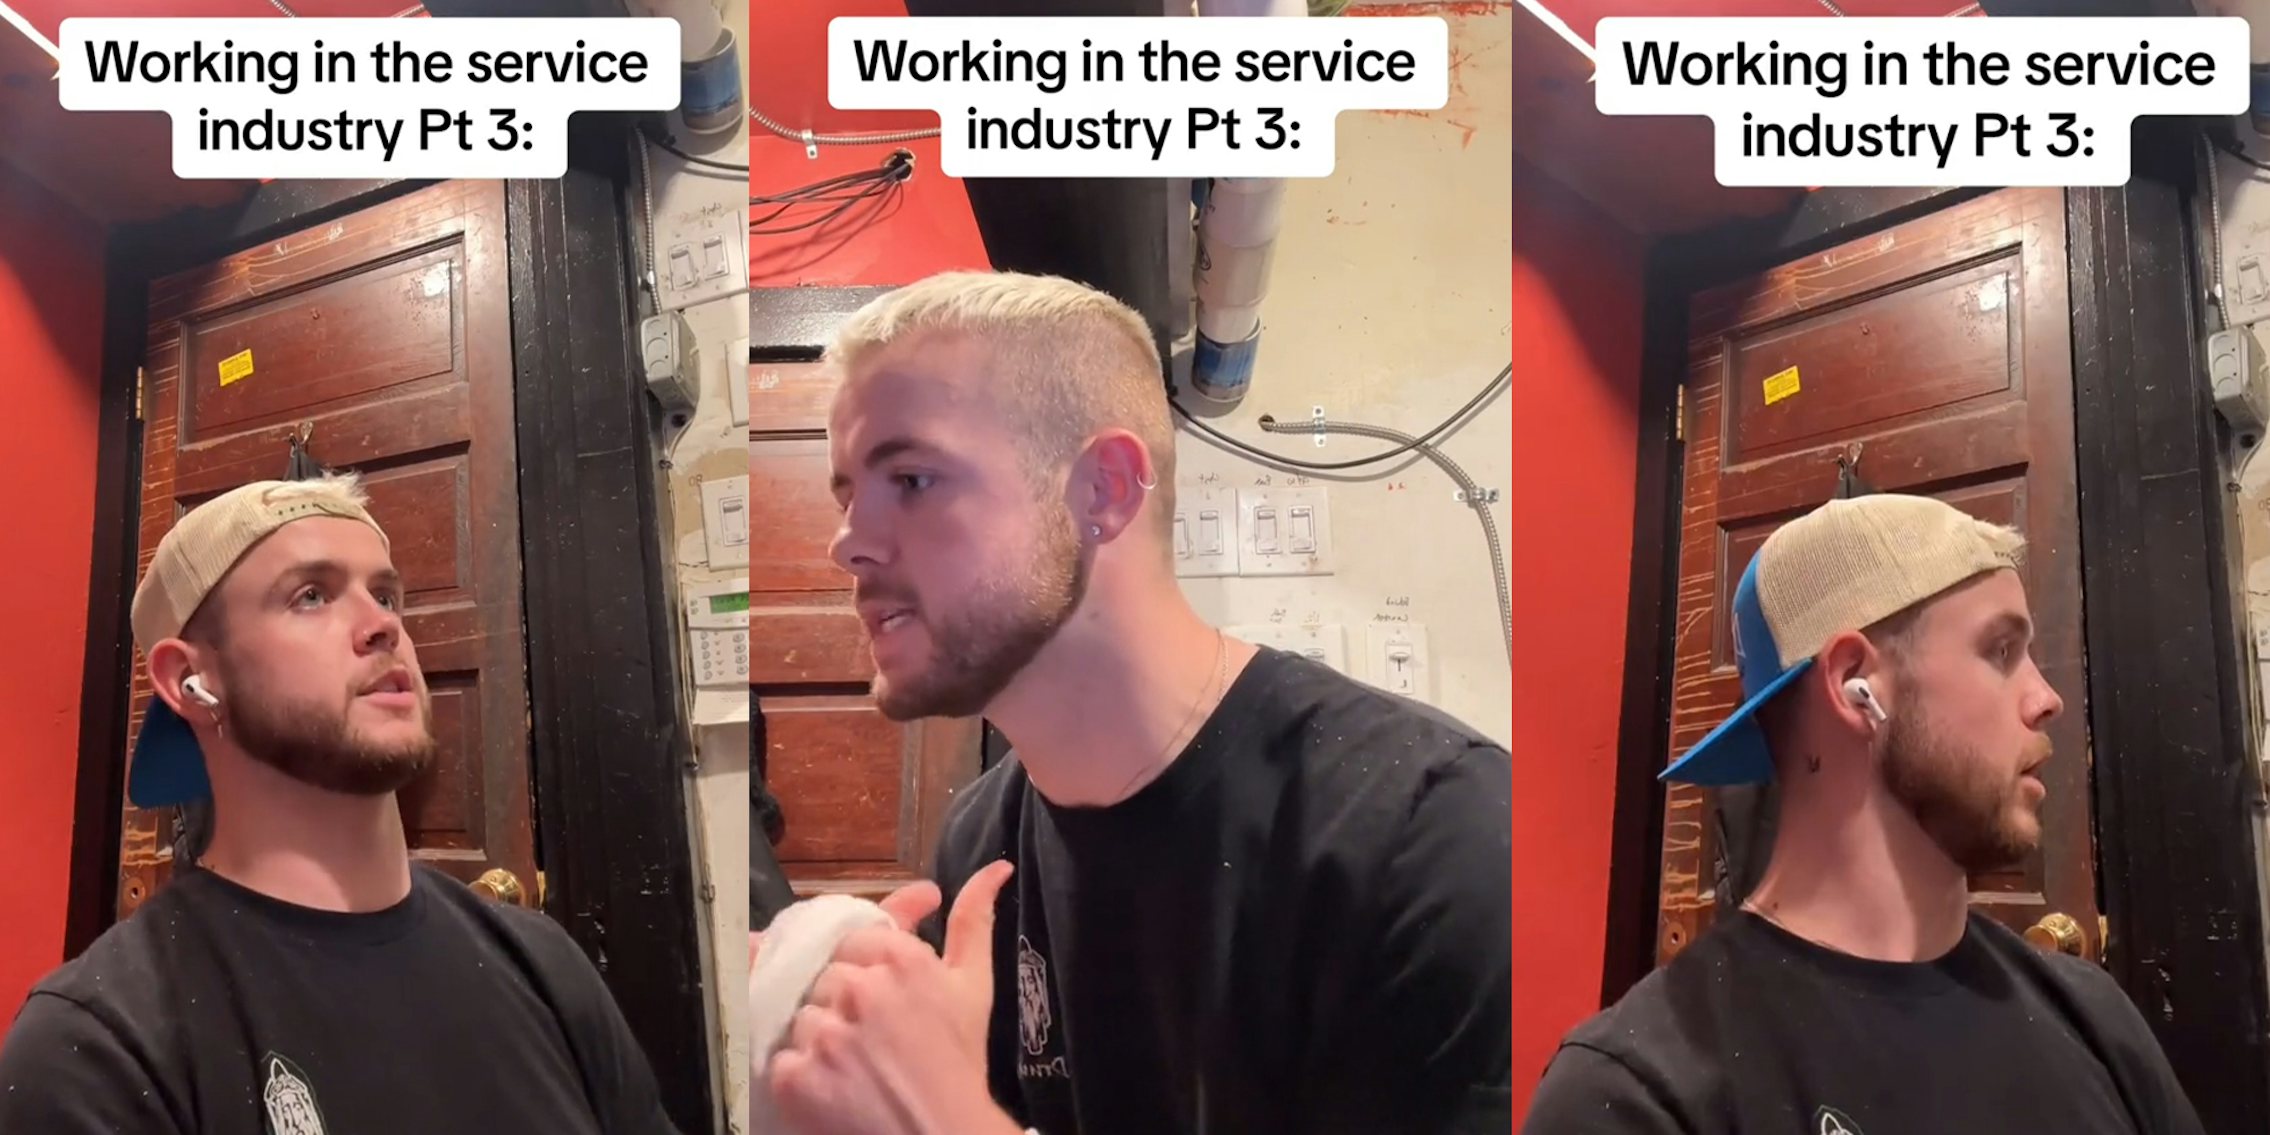 Server calls out customers who interrupt him before he's finished talking